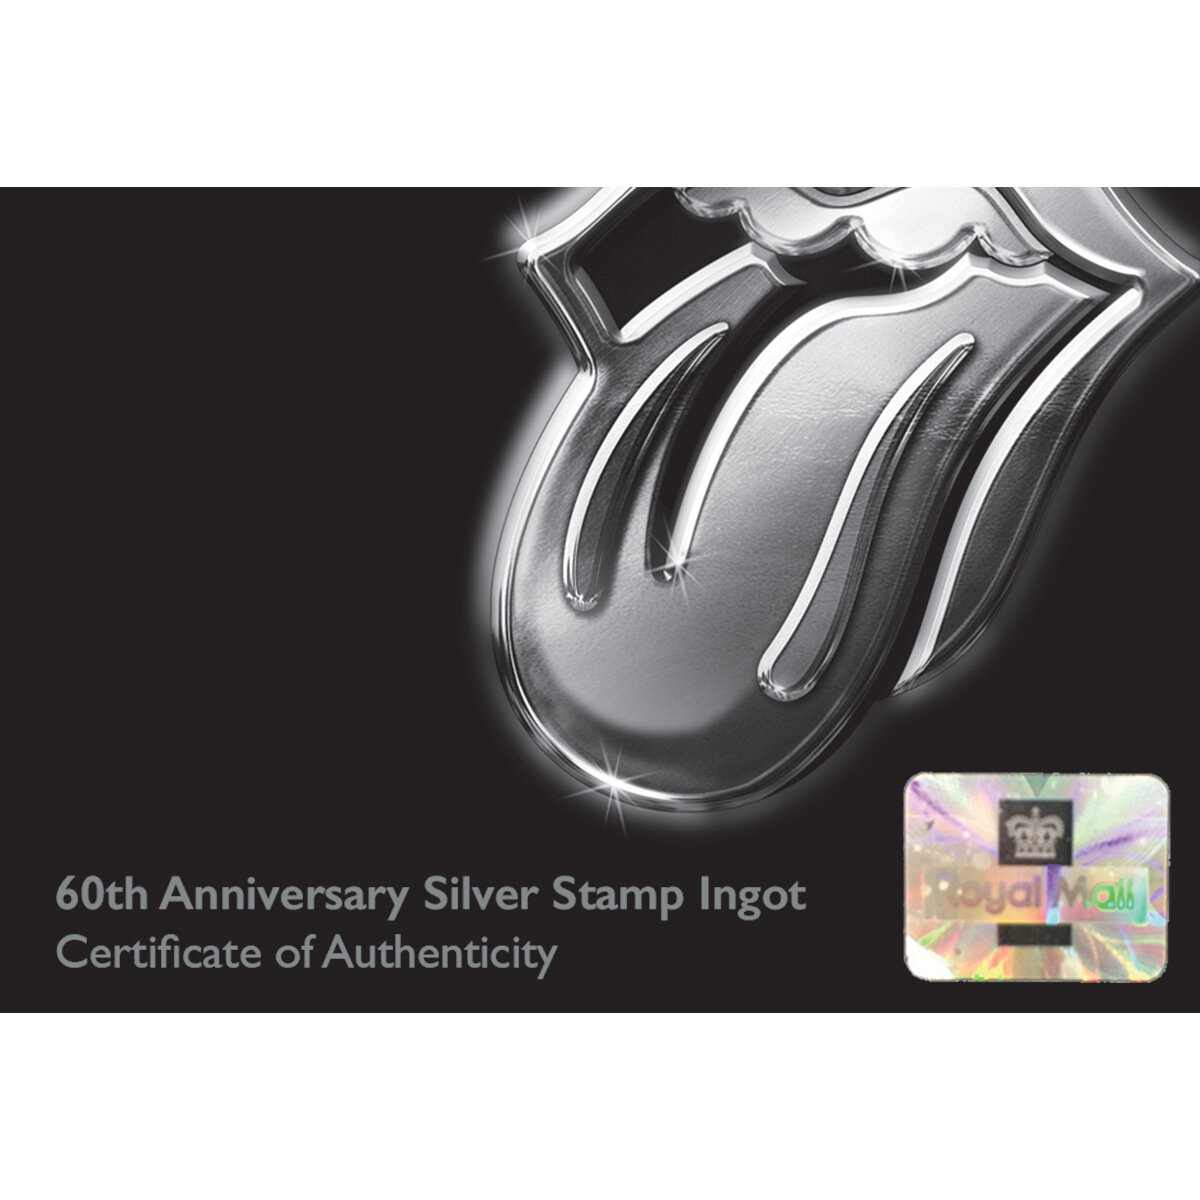 Buy The Rolling Stones Mick & Keith Silver Stamp Ingot Cert1 Image at Costco.co.uk